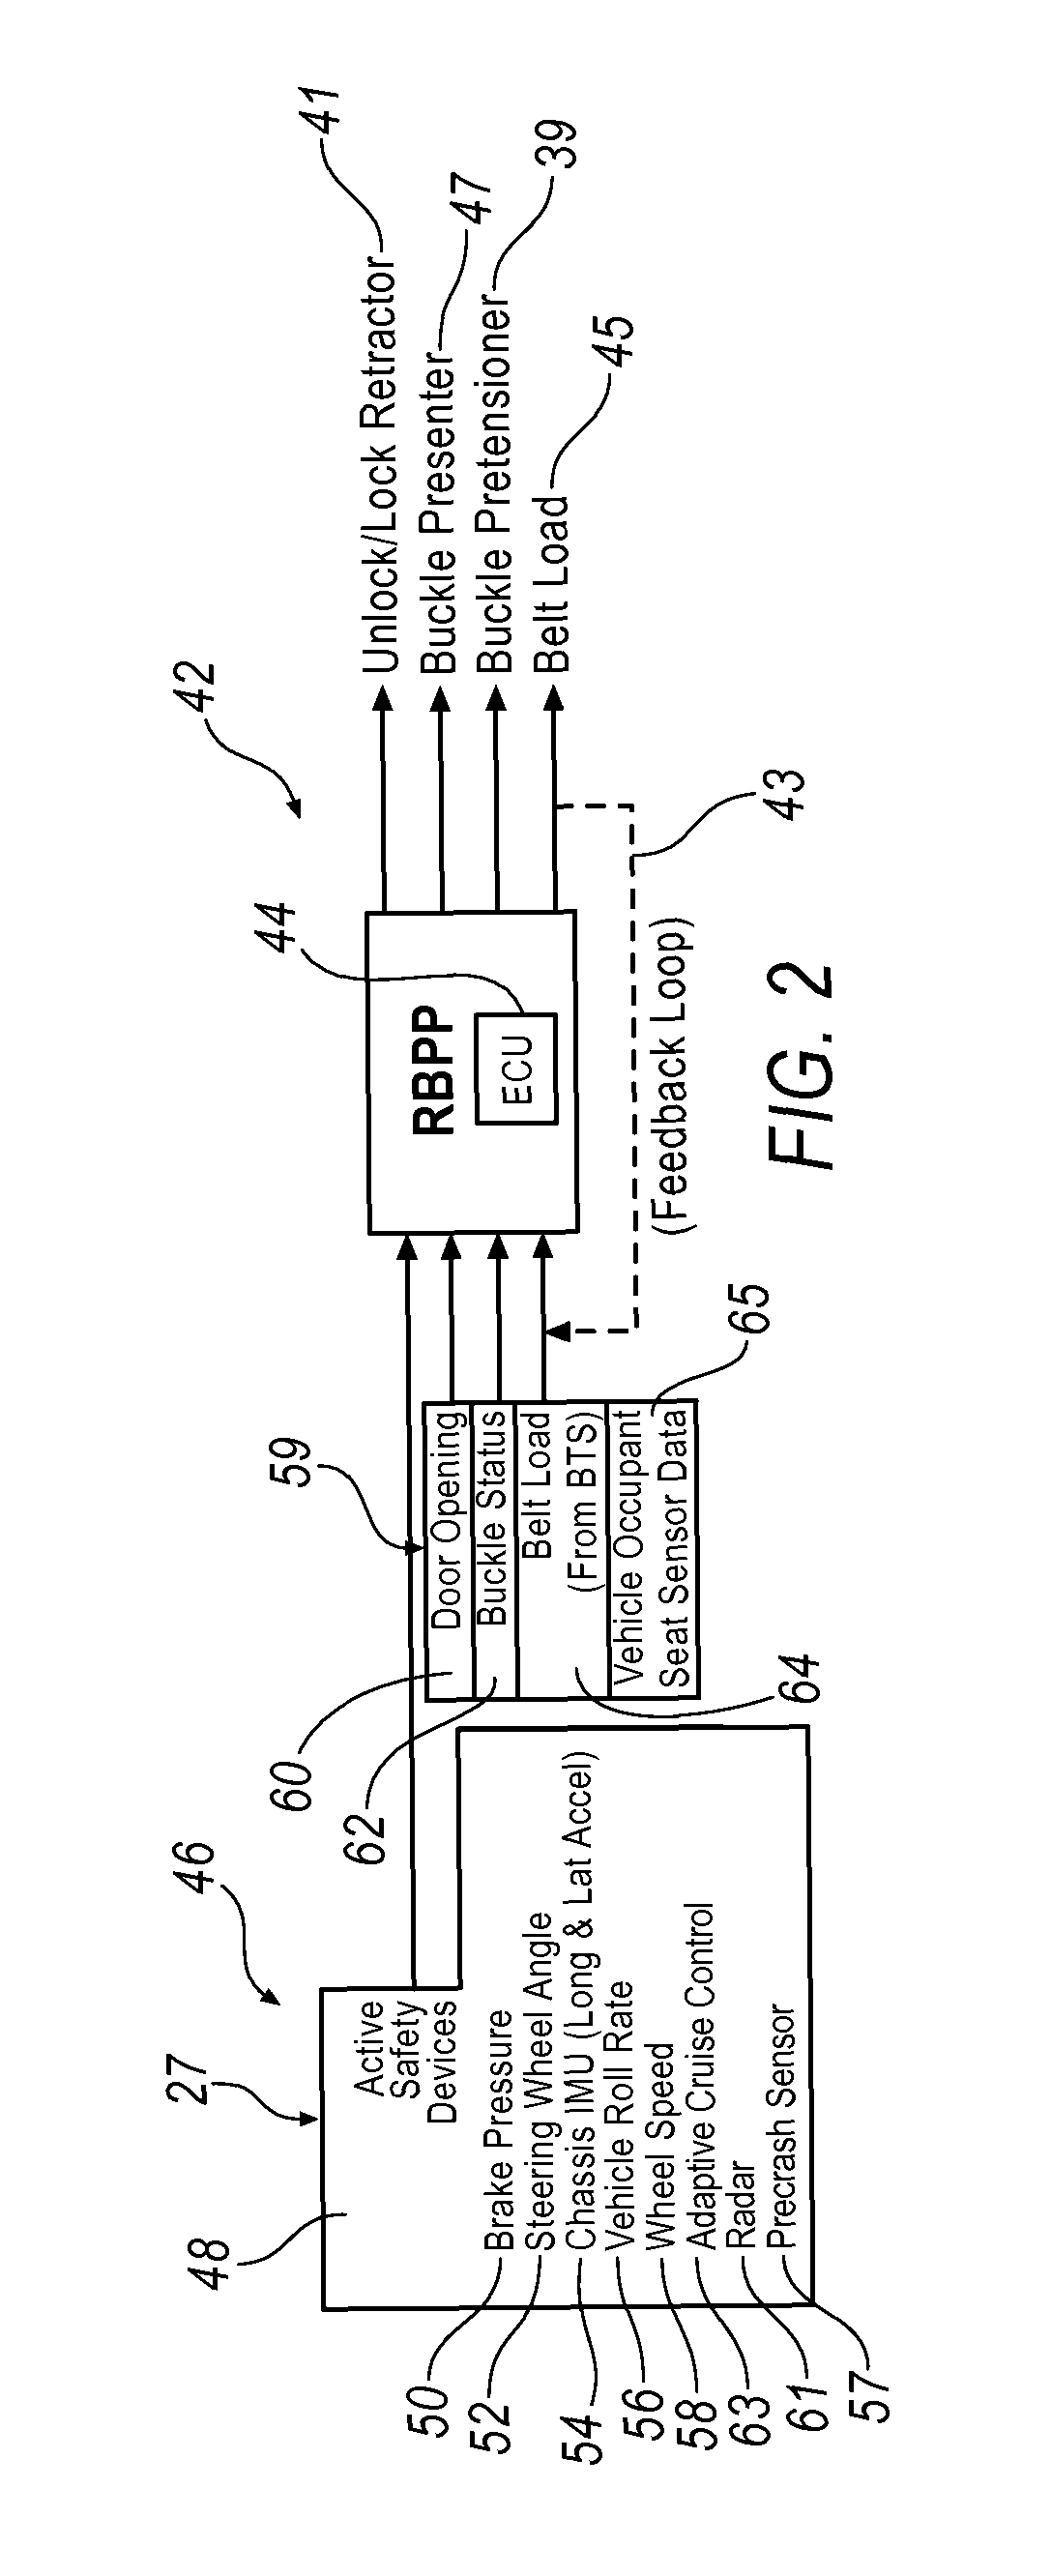 Re-settable vehicle seat belt buckle pre-tensioner presenter system and method of operation